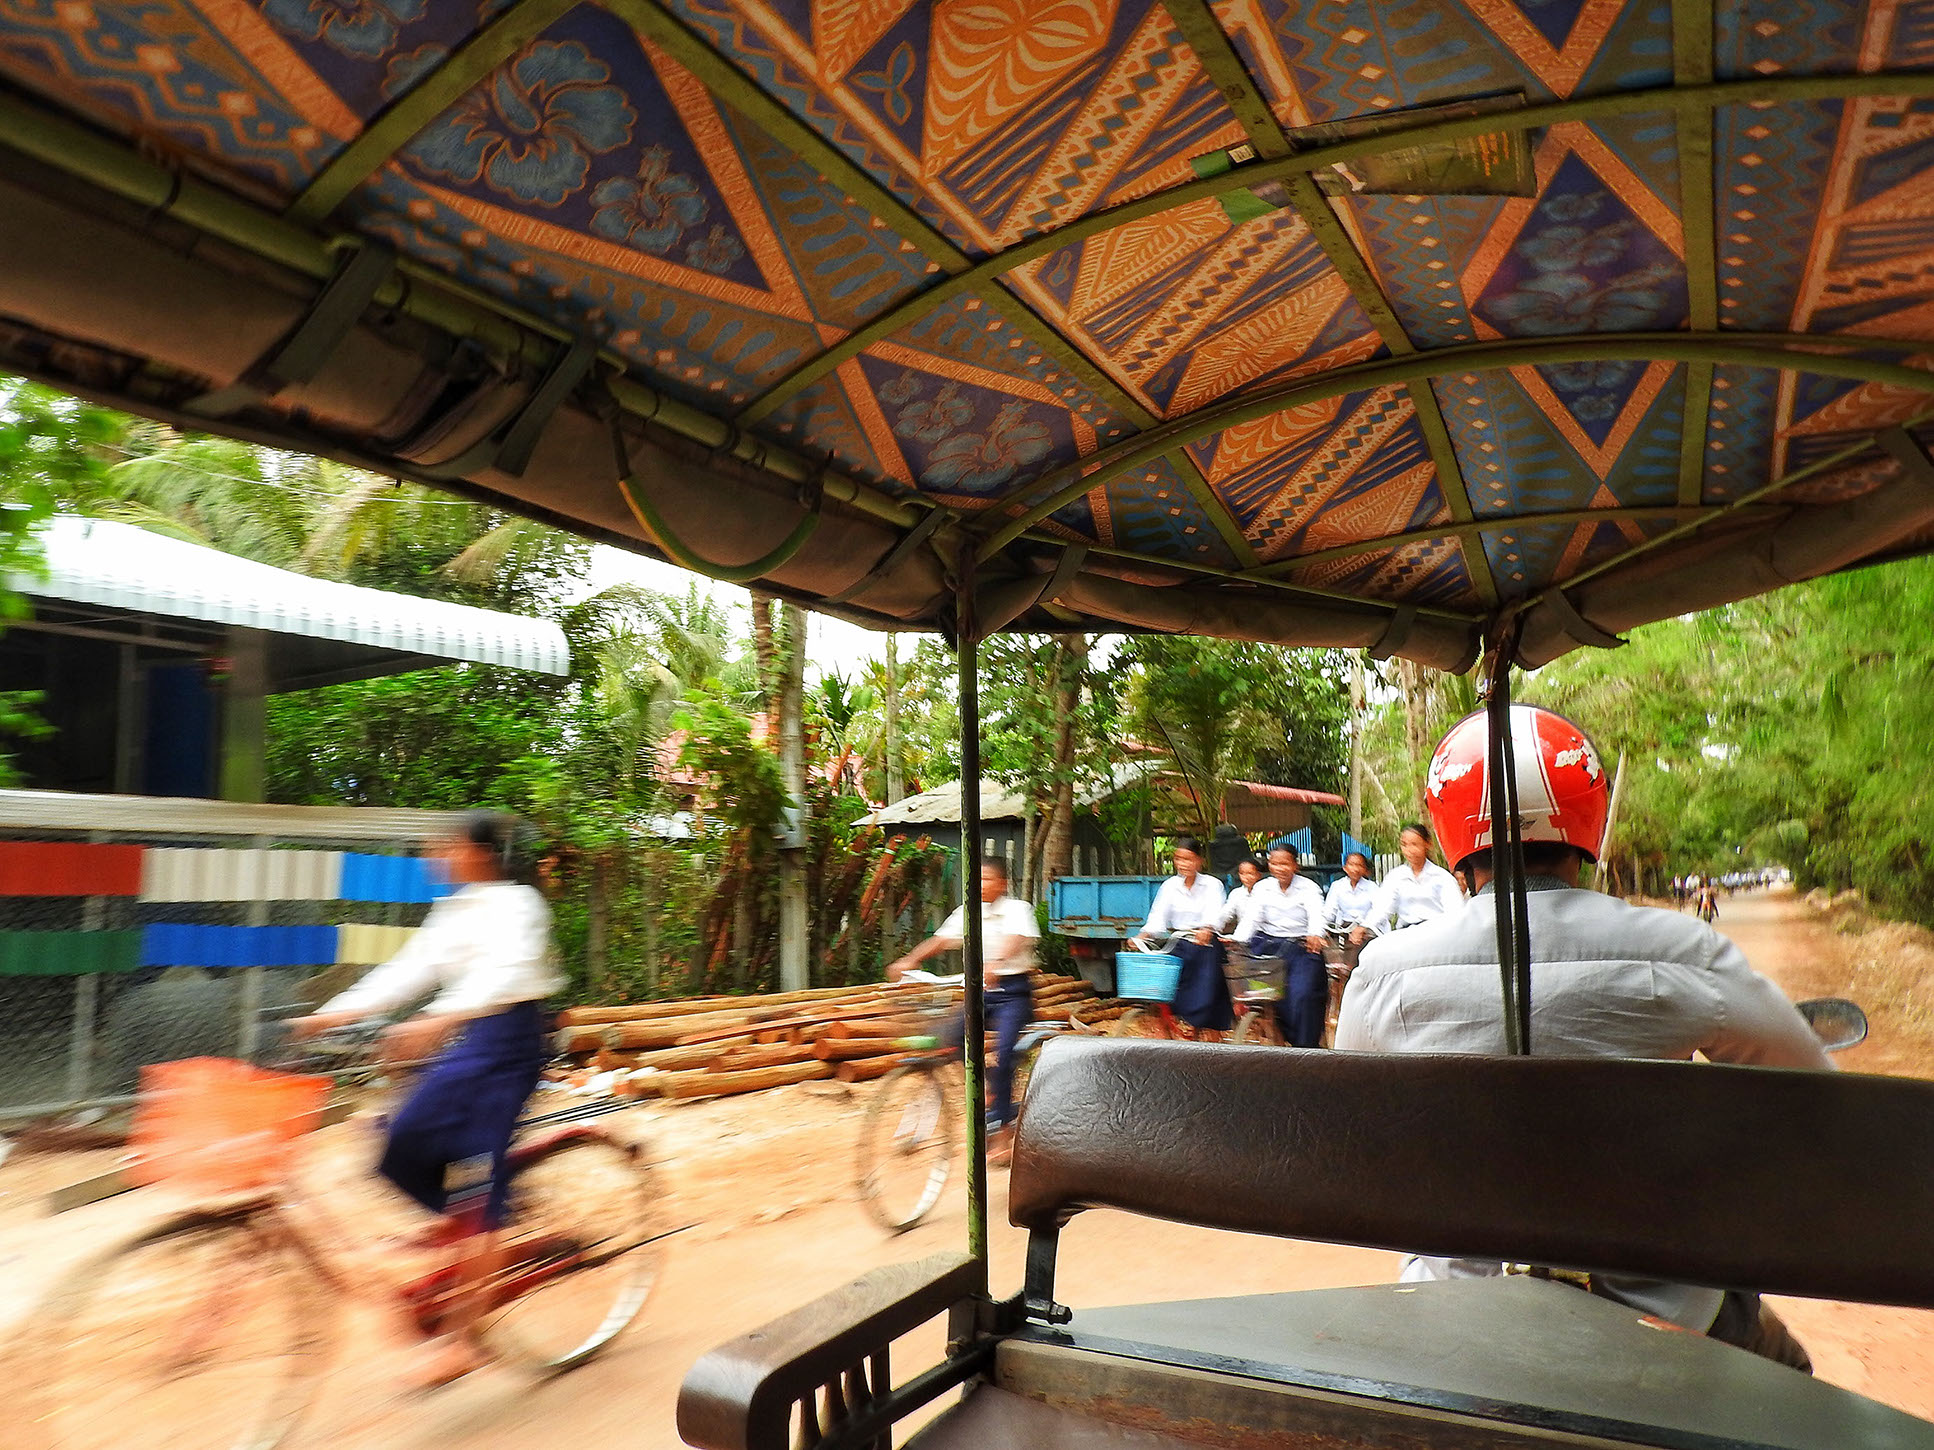 A tuk-tuk ride in Siem Reap is perfect for an exhilarating experience of the city